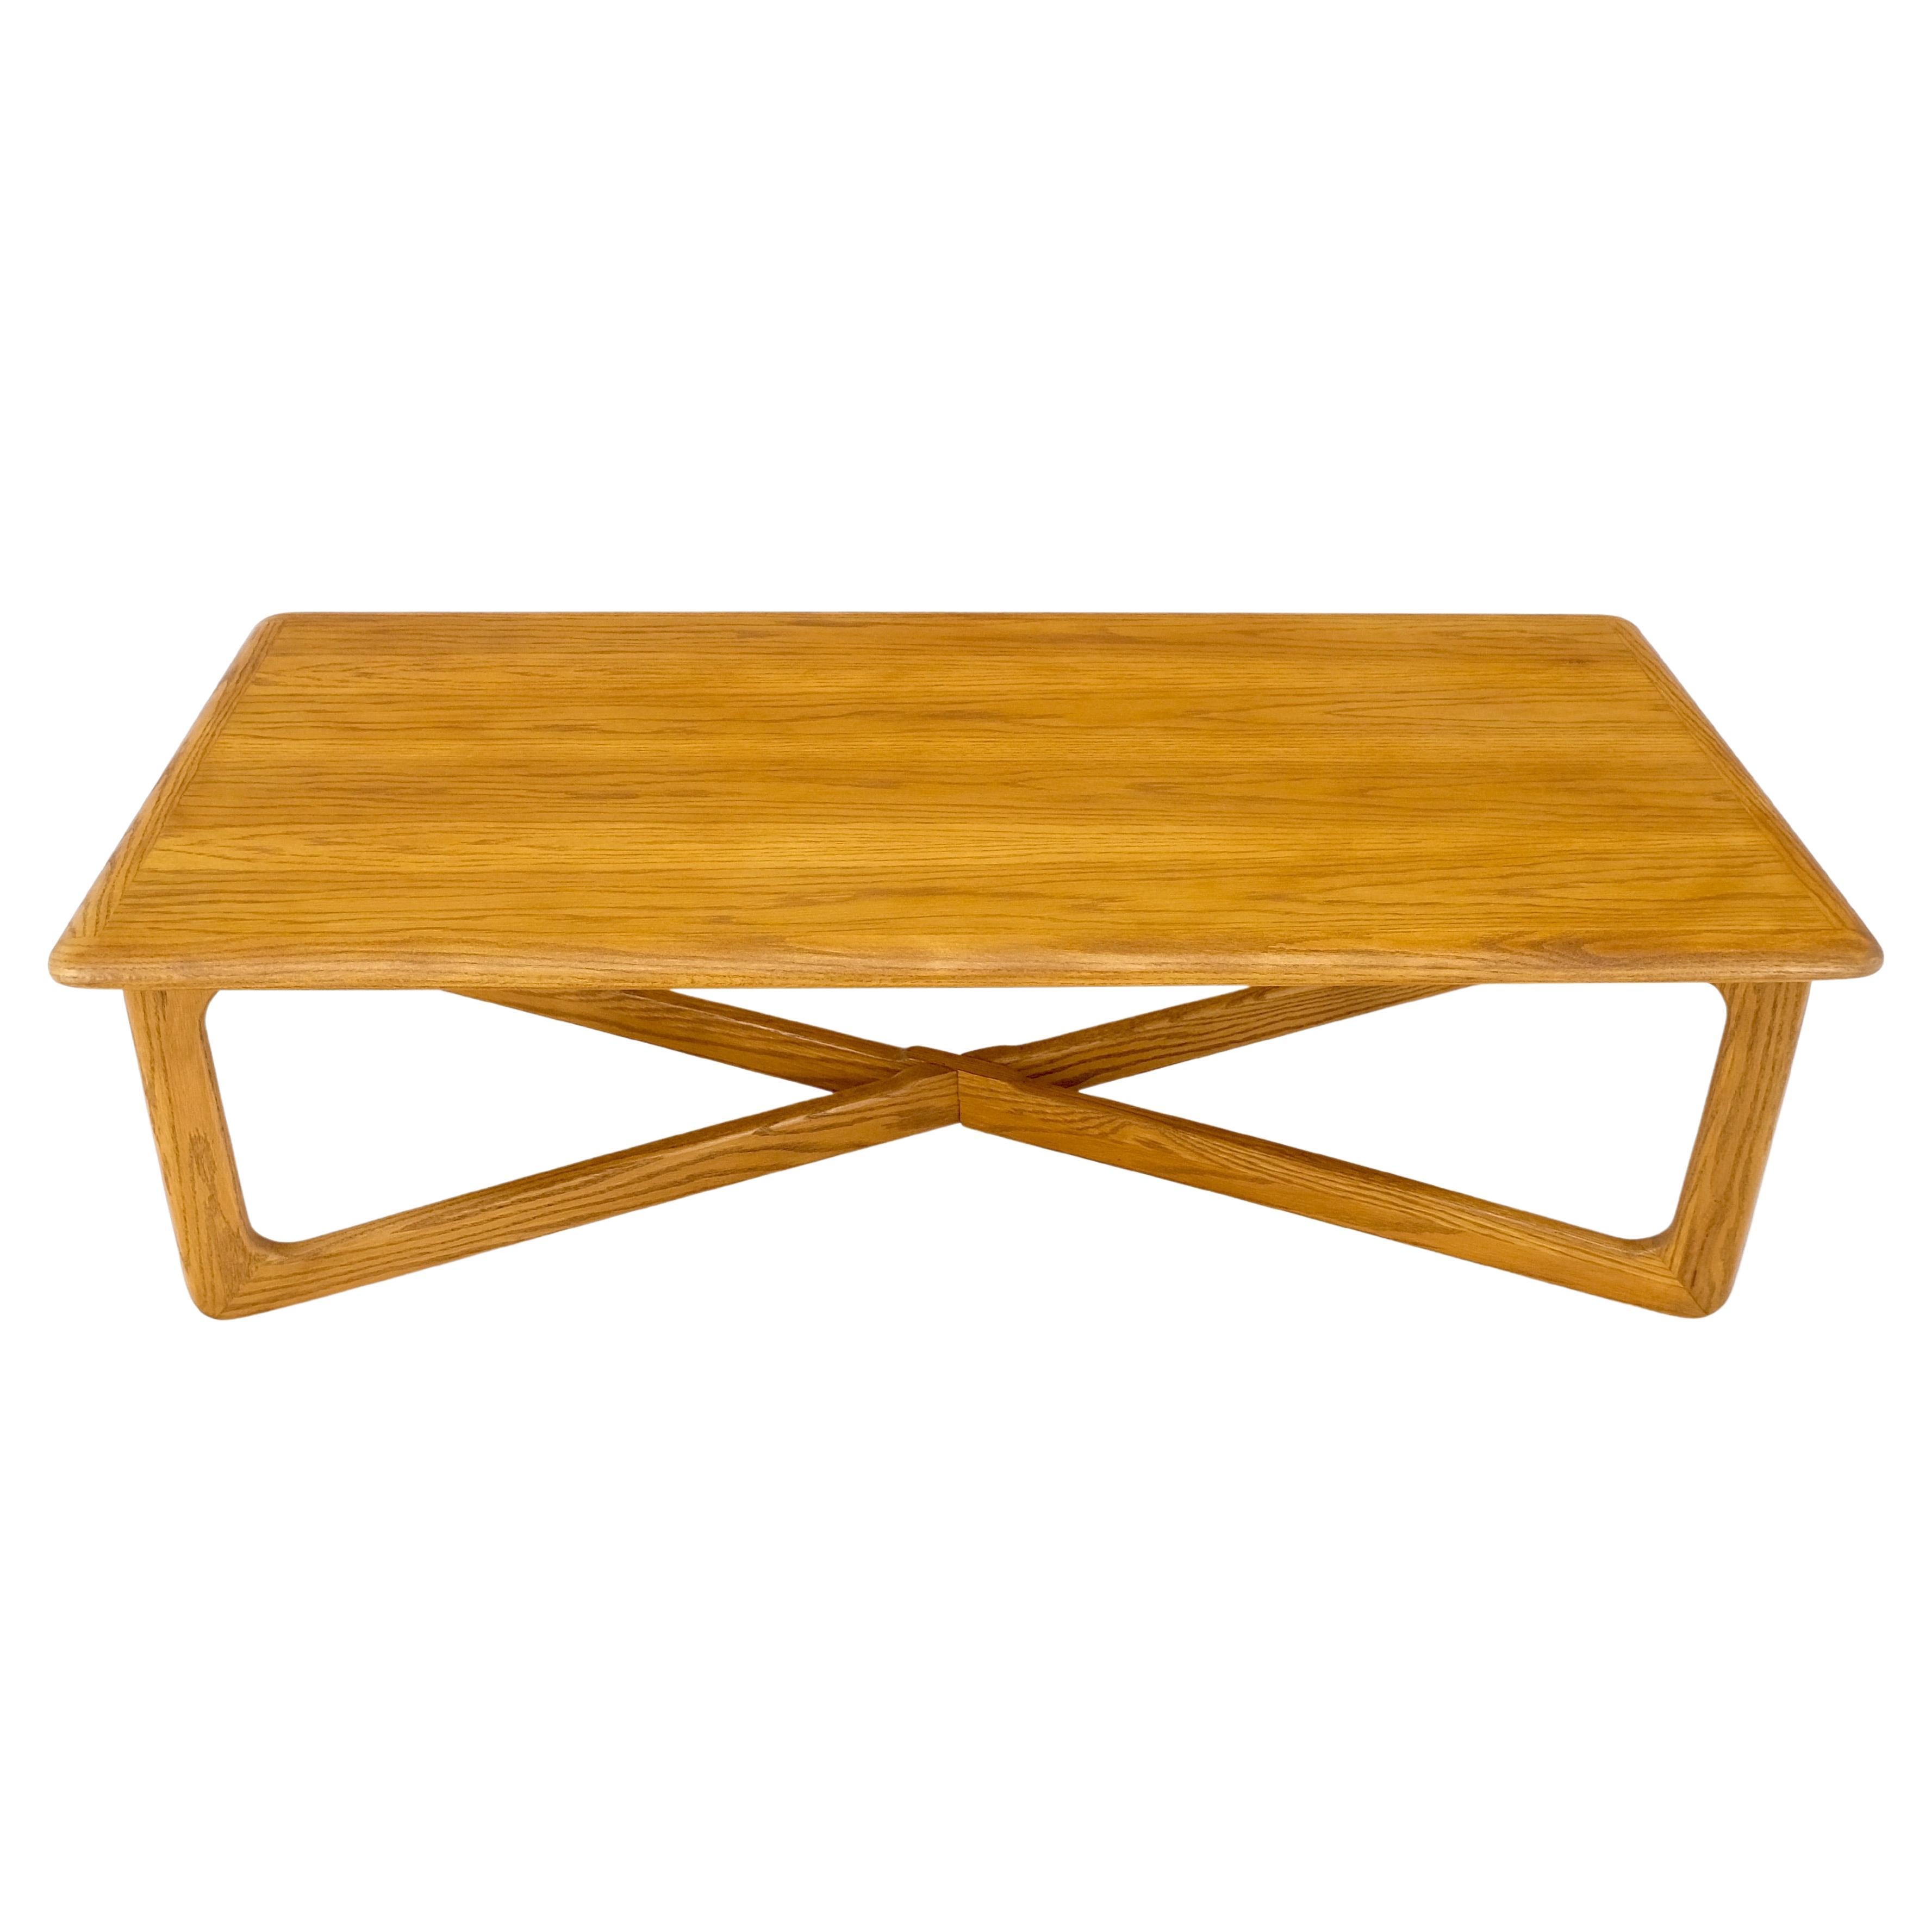 Restored x Base Rectangle Chestnut Coffee Table by Lane Mid-Century Modern Mint!